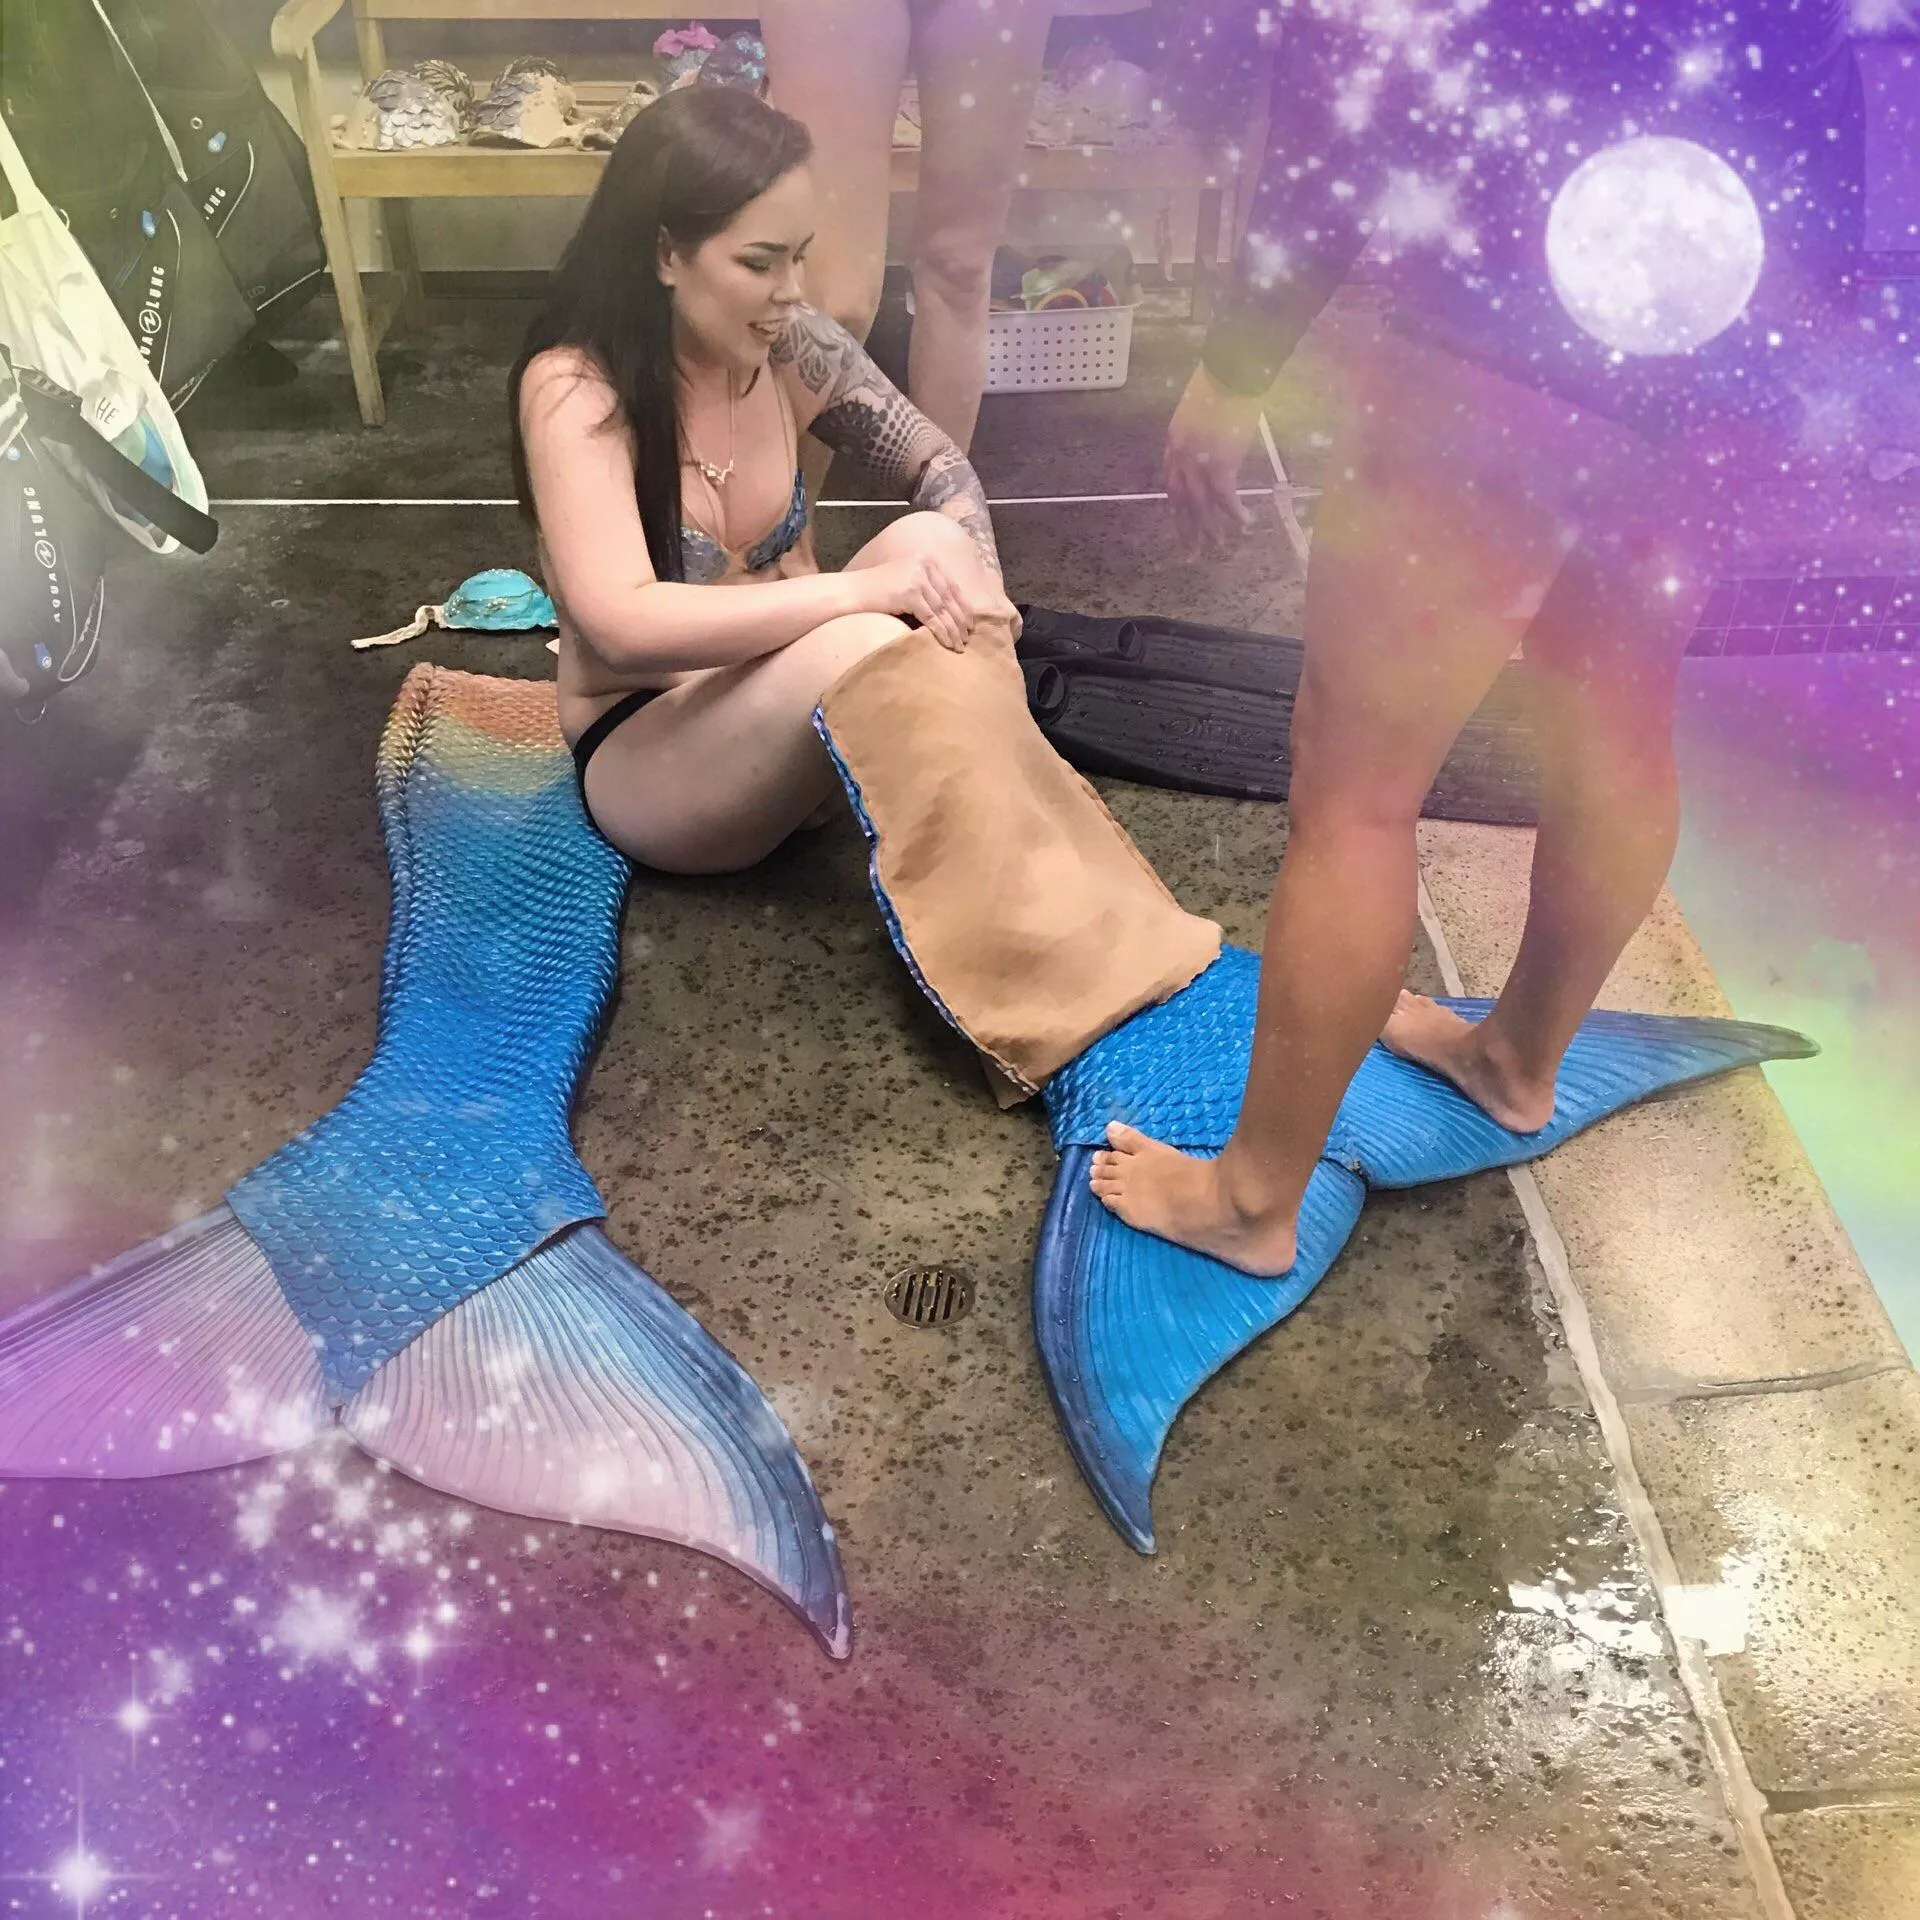 Mermaid Tail Porn - Another (more revealing) BTS photo from Suzy's mermaid photoshoot nudes by  killingcrushes